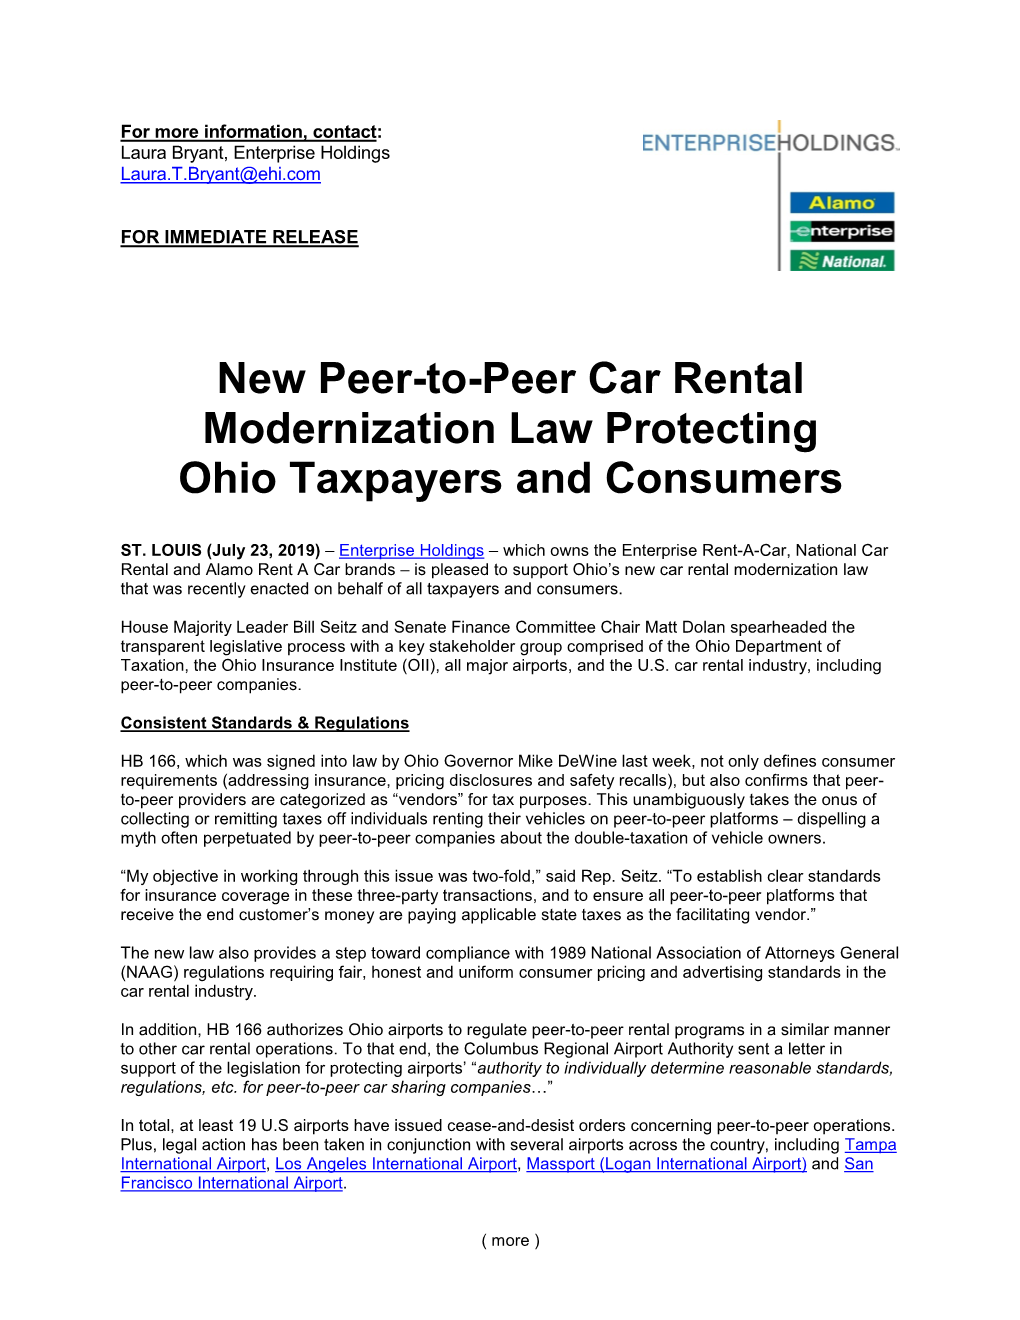 Ohio Taxpayers and Consumers Press Release